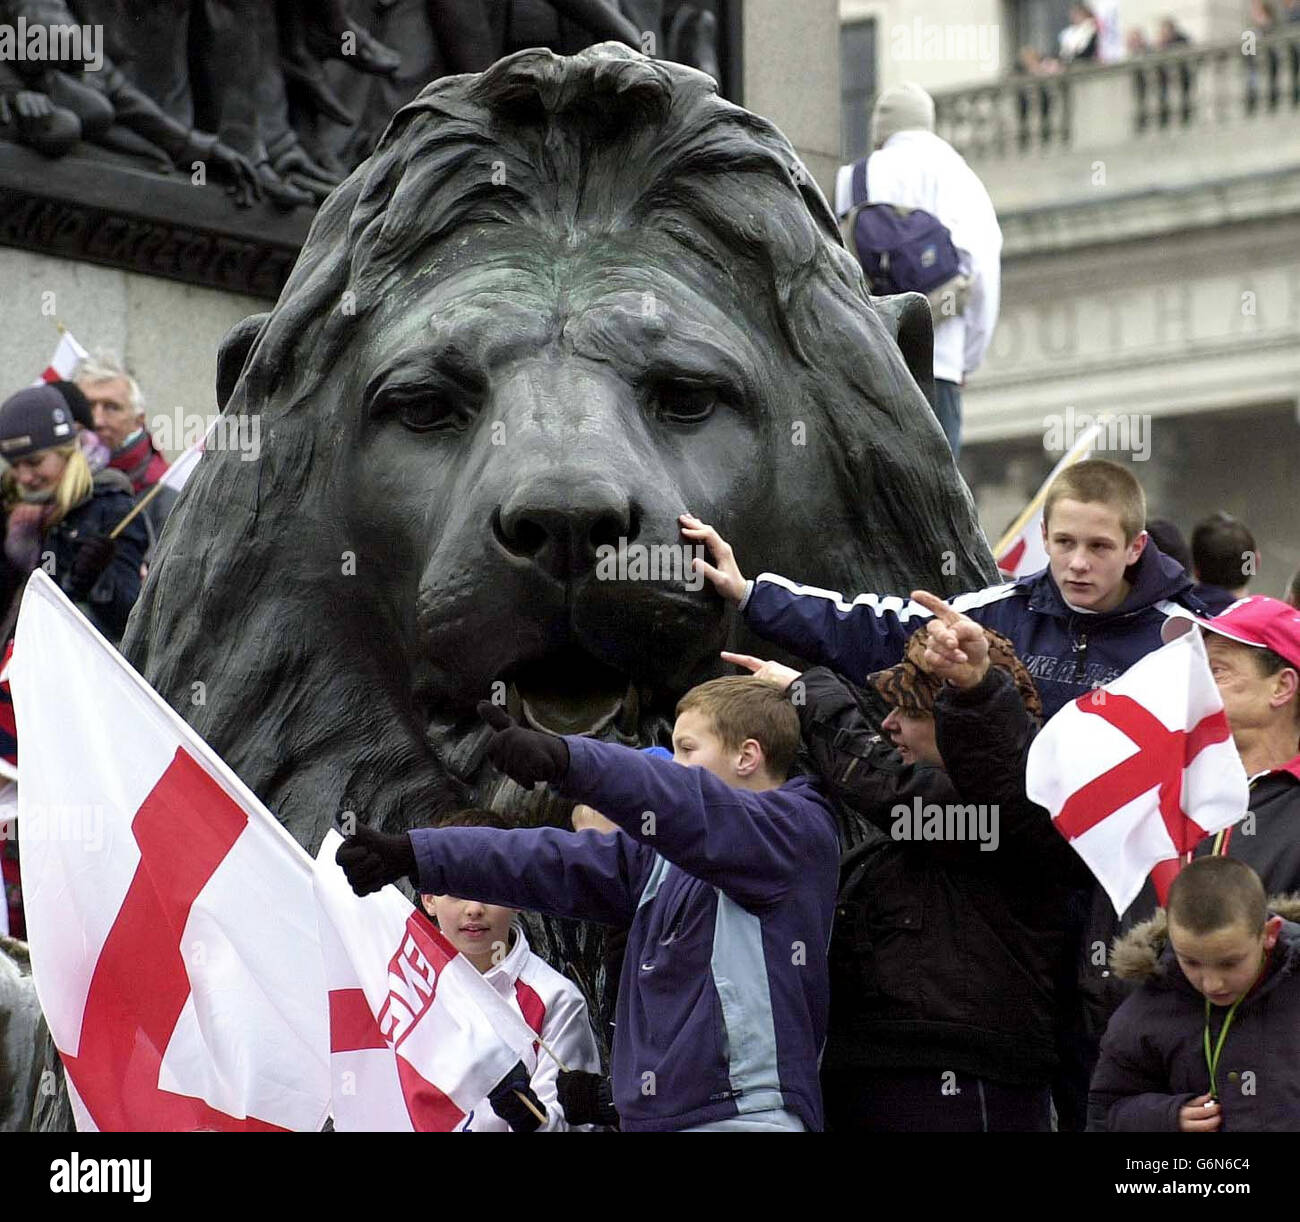 Spectators wait on a lion at Trafalgar Square to welcome Rugby World Cup players, during the Victory Parade in London. Later the England Rugby World Cup winners were travelling to receptions at Buckingham Palace and Downing Street. Stock Photo